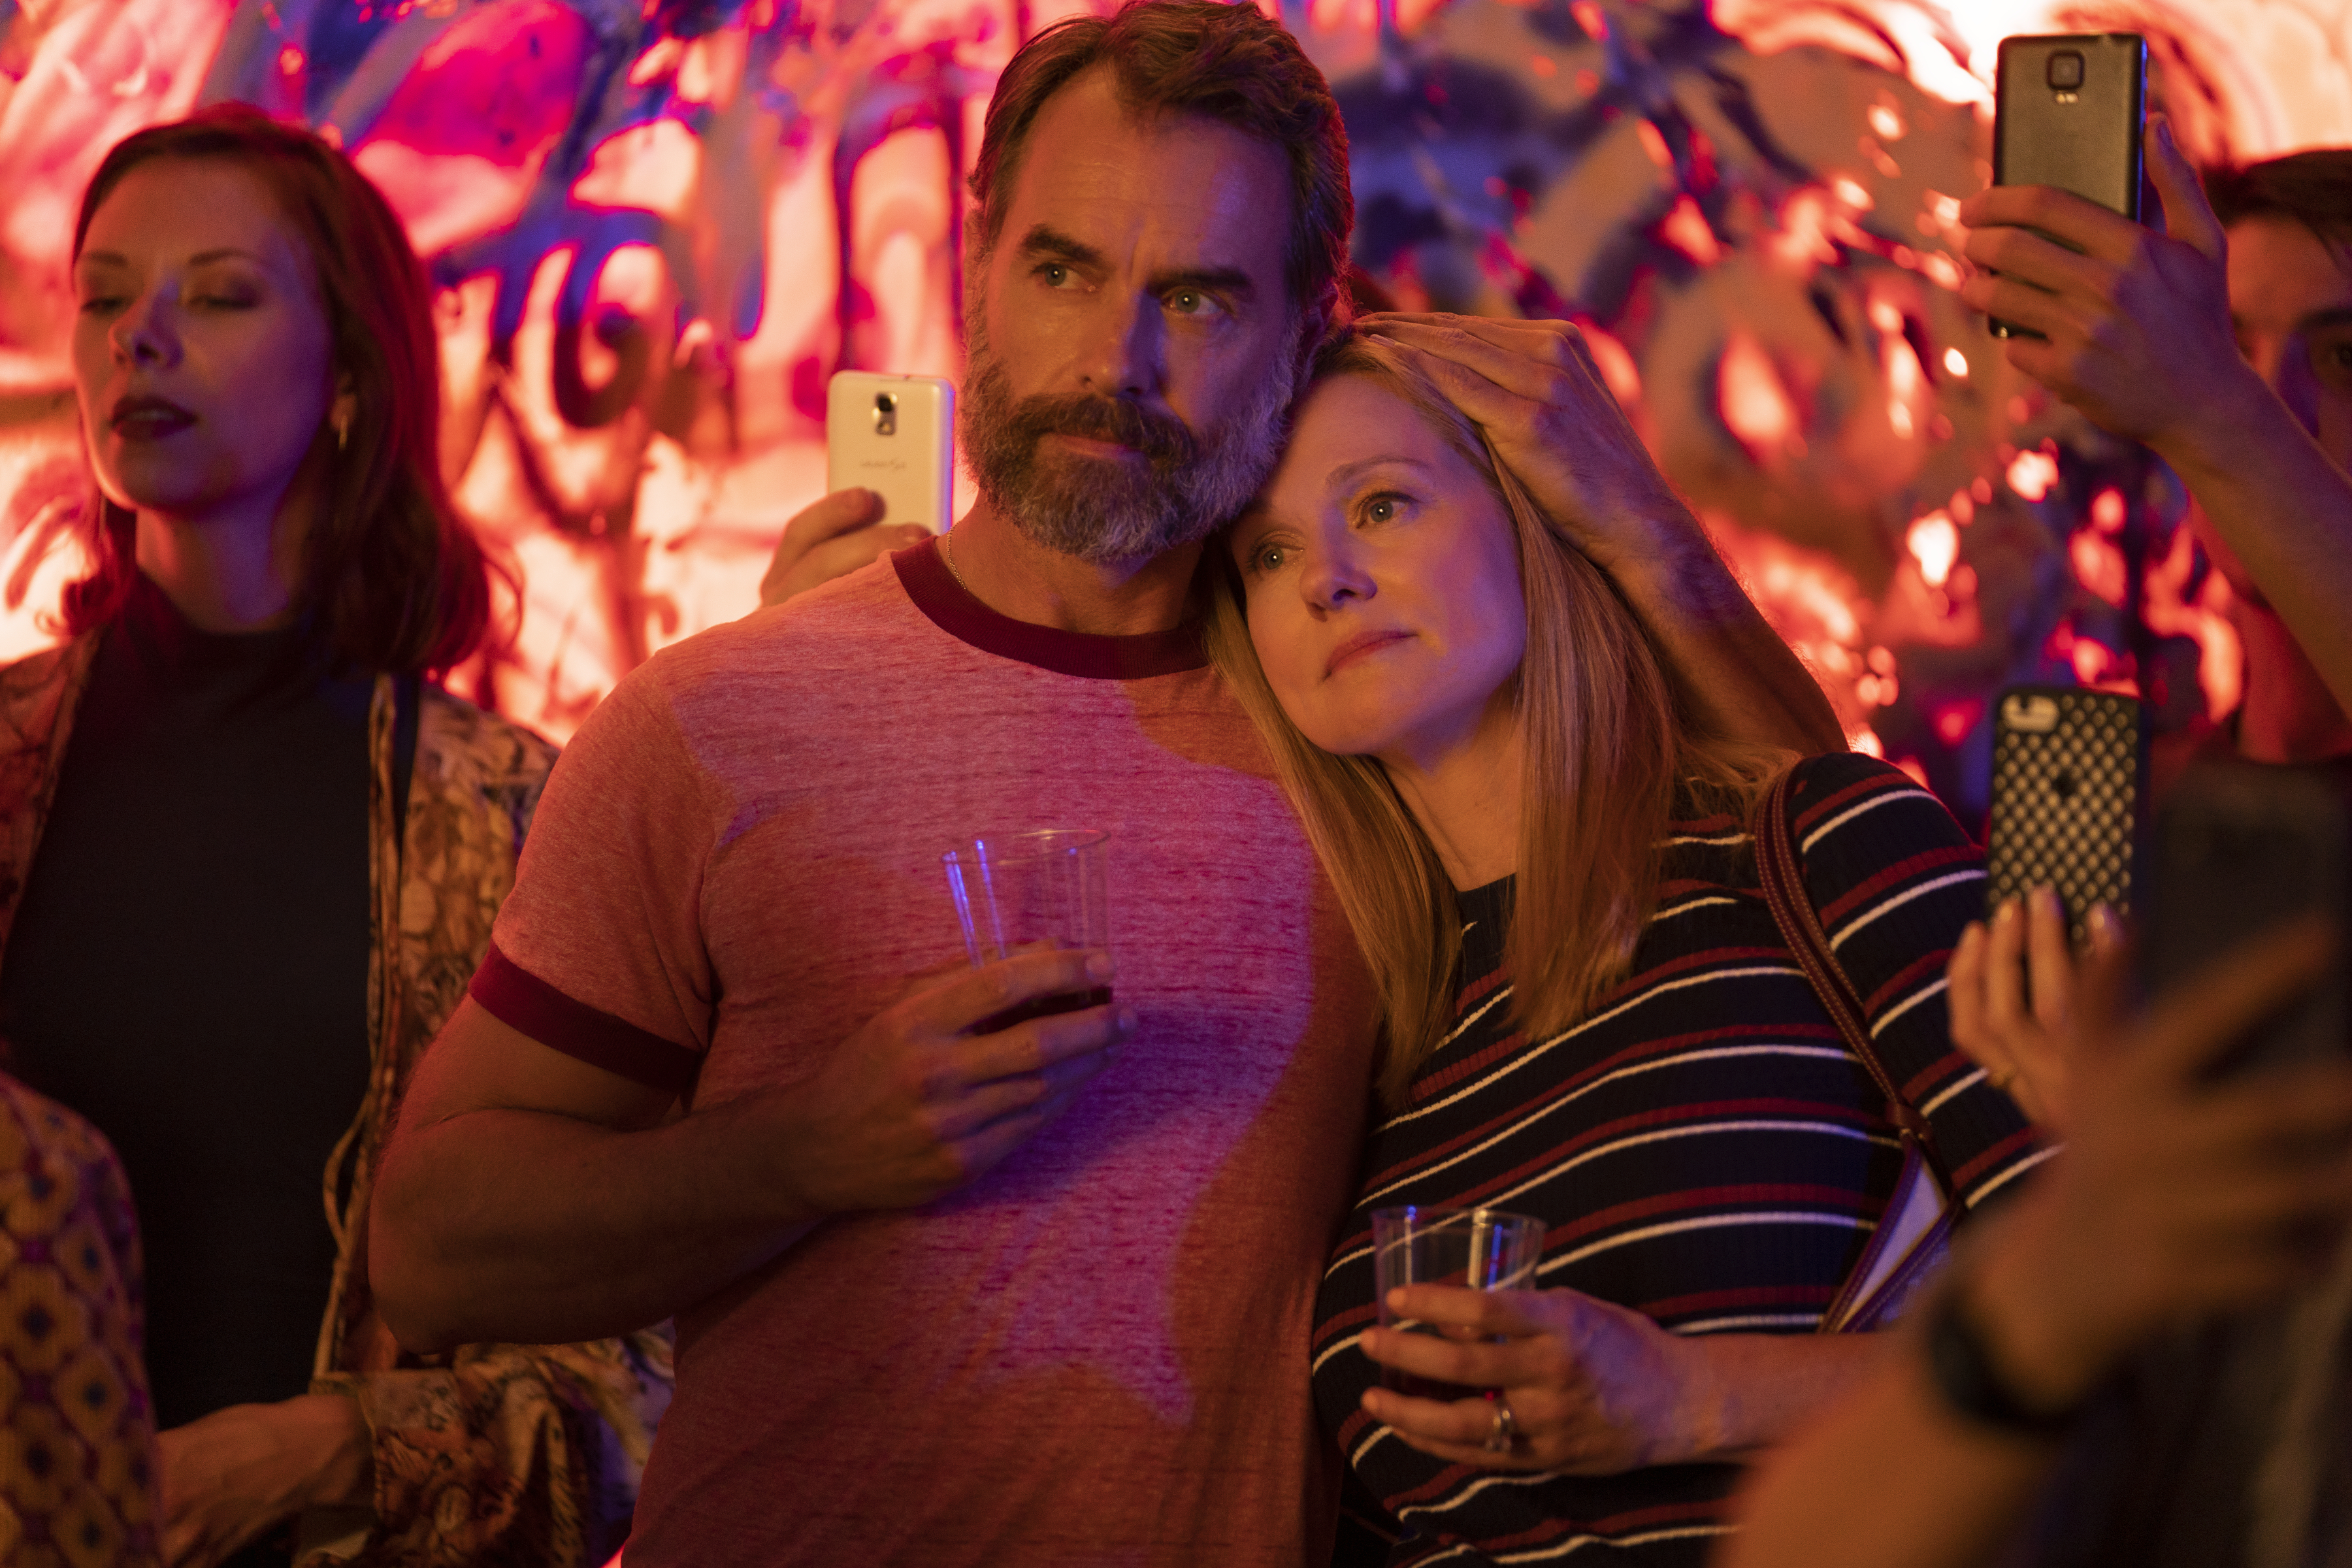 A still from Tales of the City featuring Paul Gross and Laura Linney embracing, holding drinks.